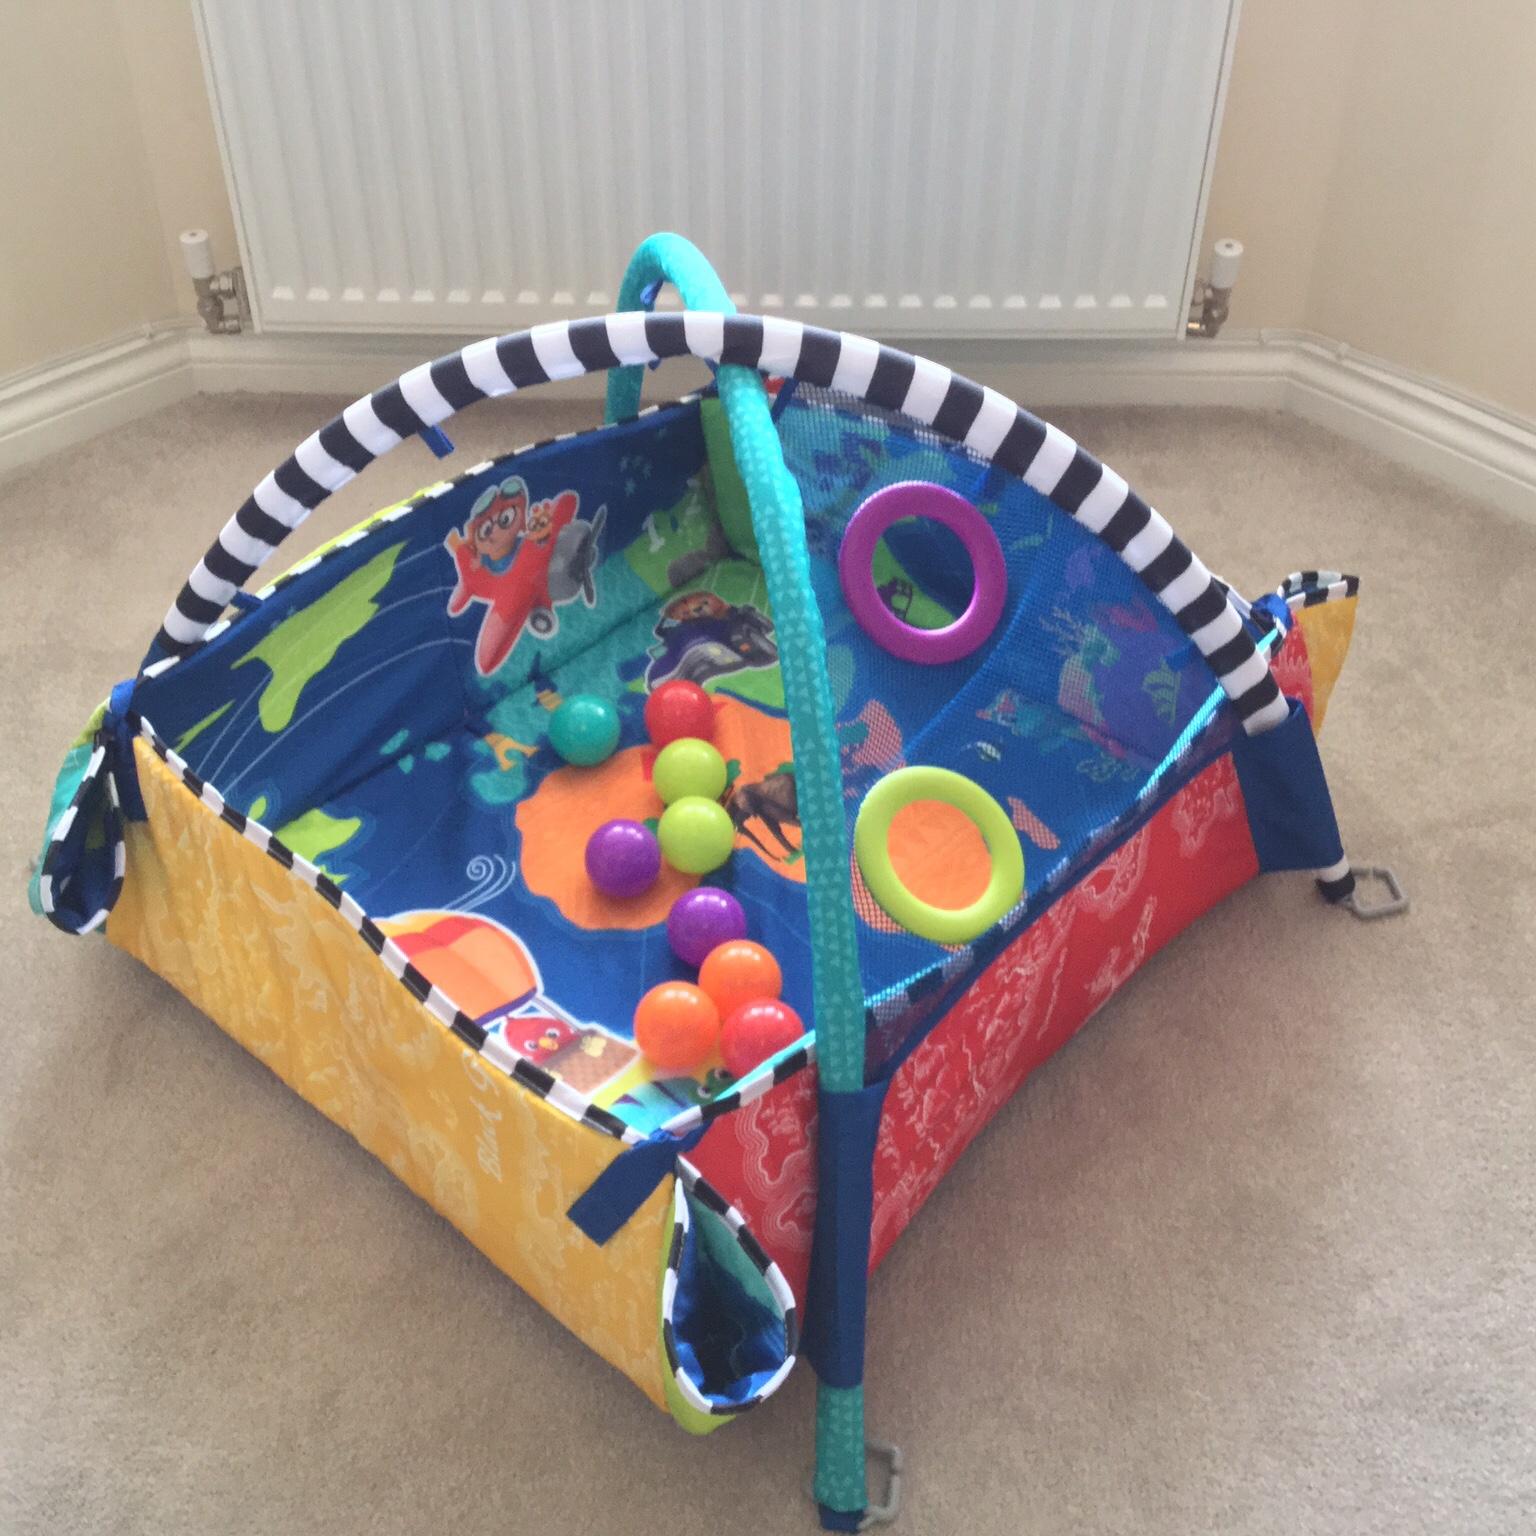 Baby Einstein Play Gym In De55 Bolsover For 25 00 For Sale Shpock